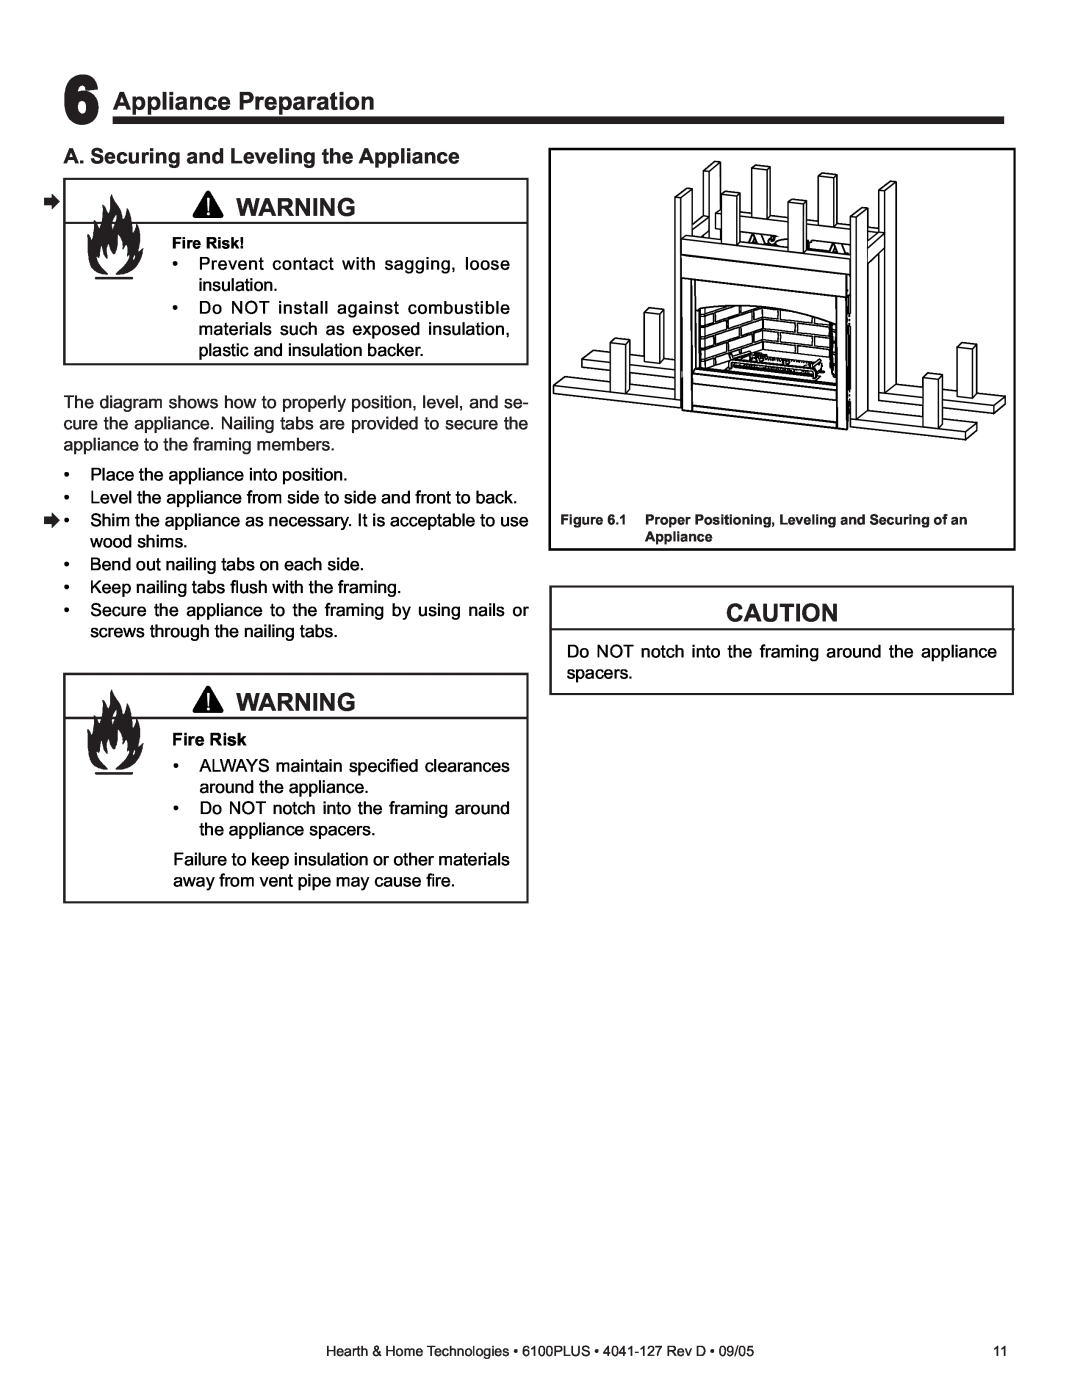 Heat & Glo LifeStyle 6100PLUS owner manual 6Appliance Preparation, A. Securing and Leveling the Appliance, Fire Risk 